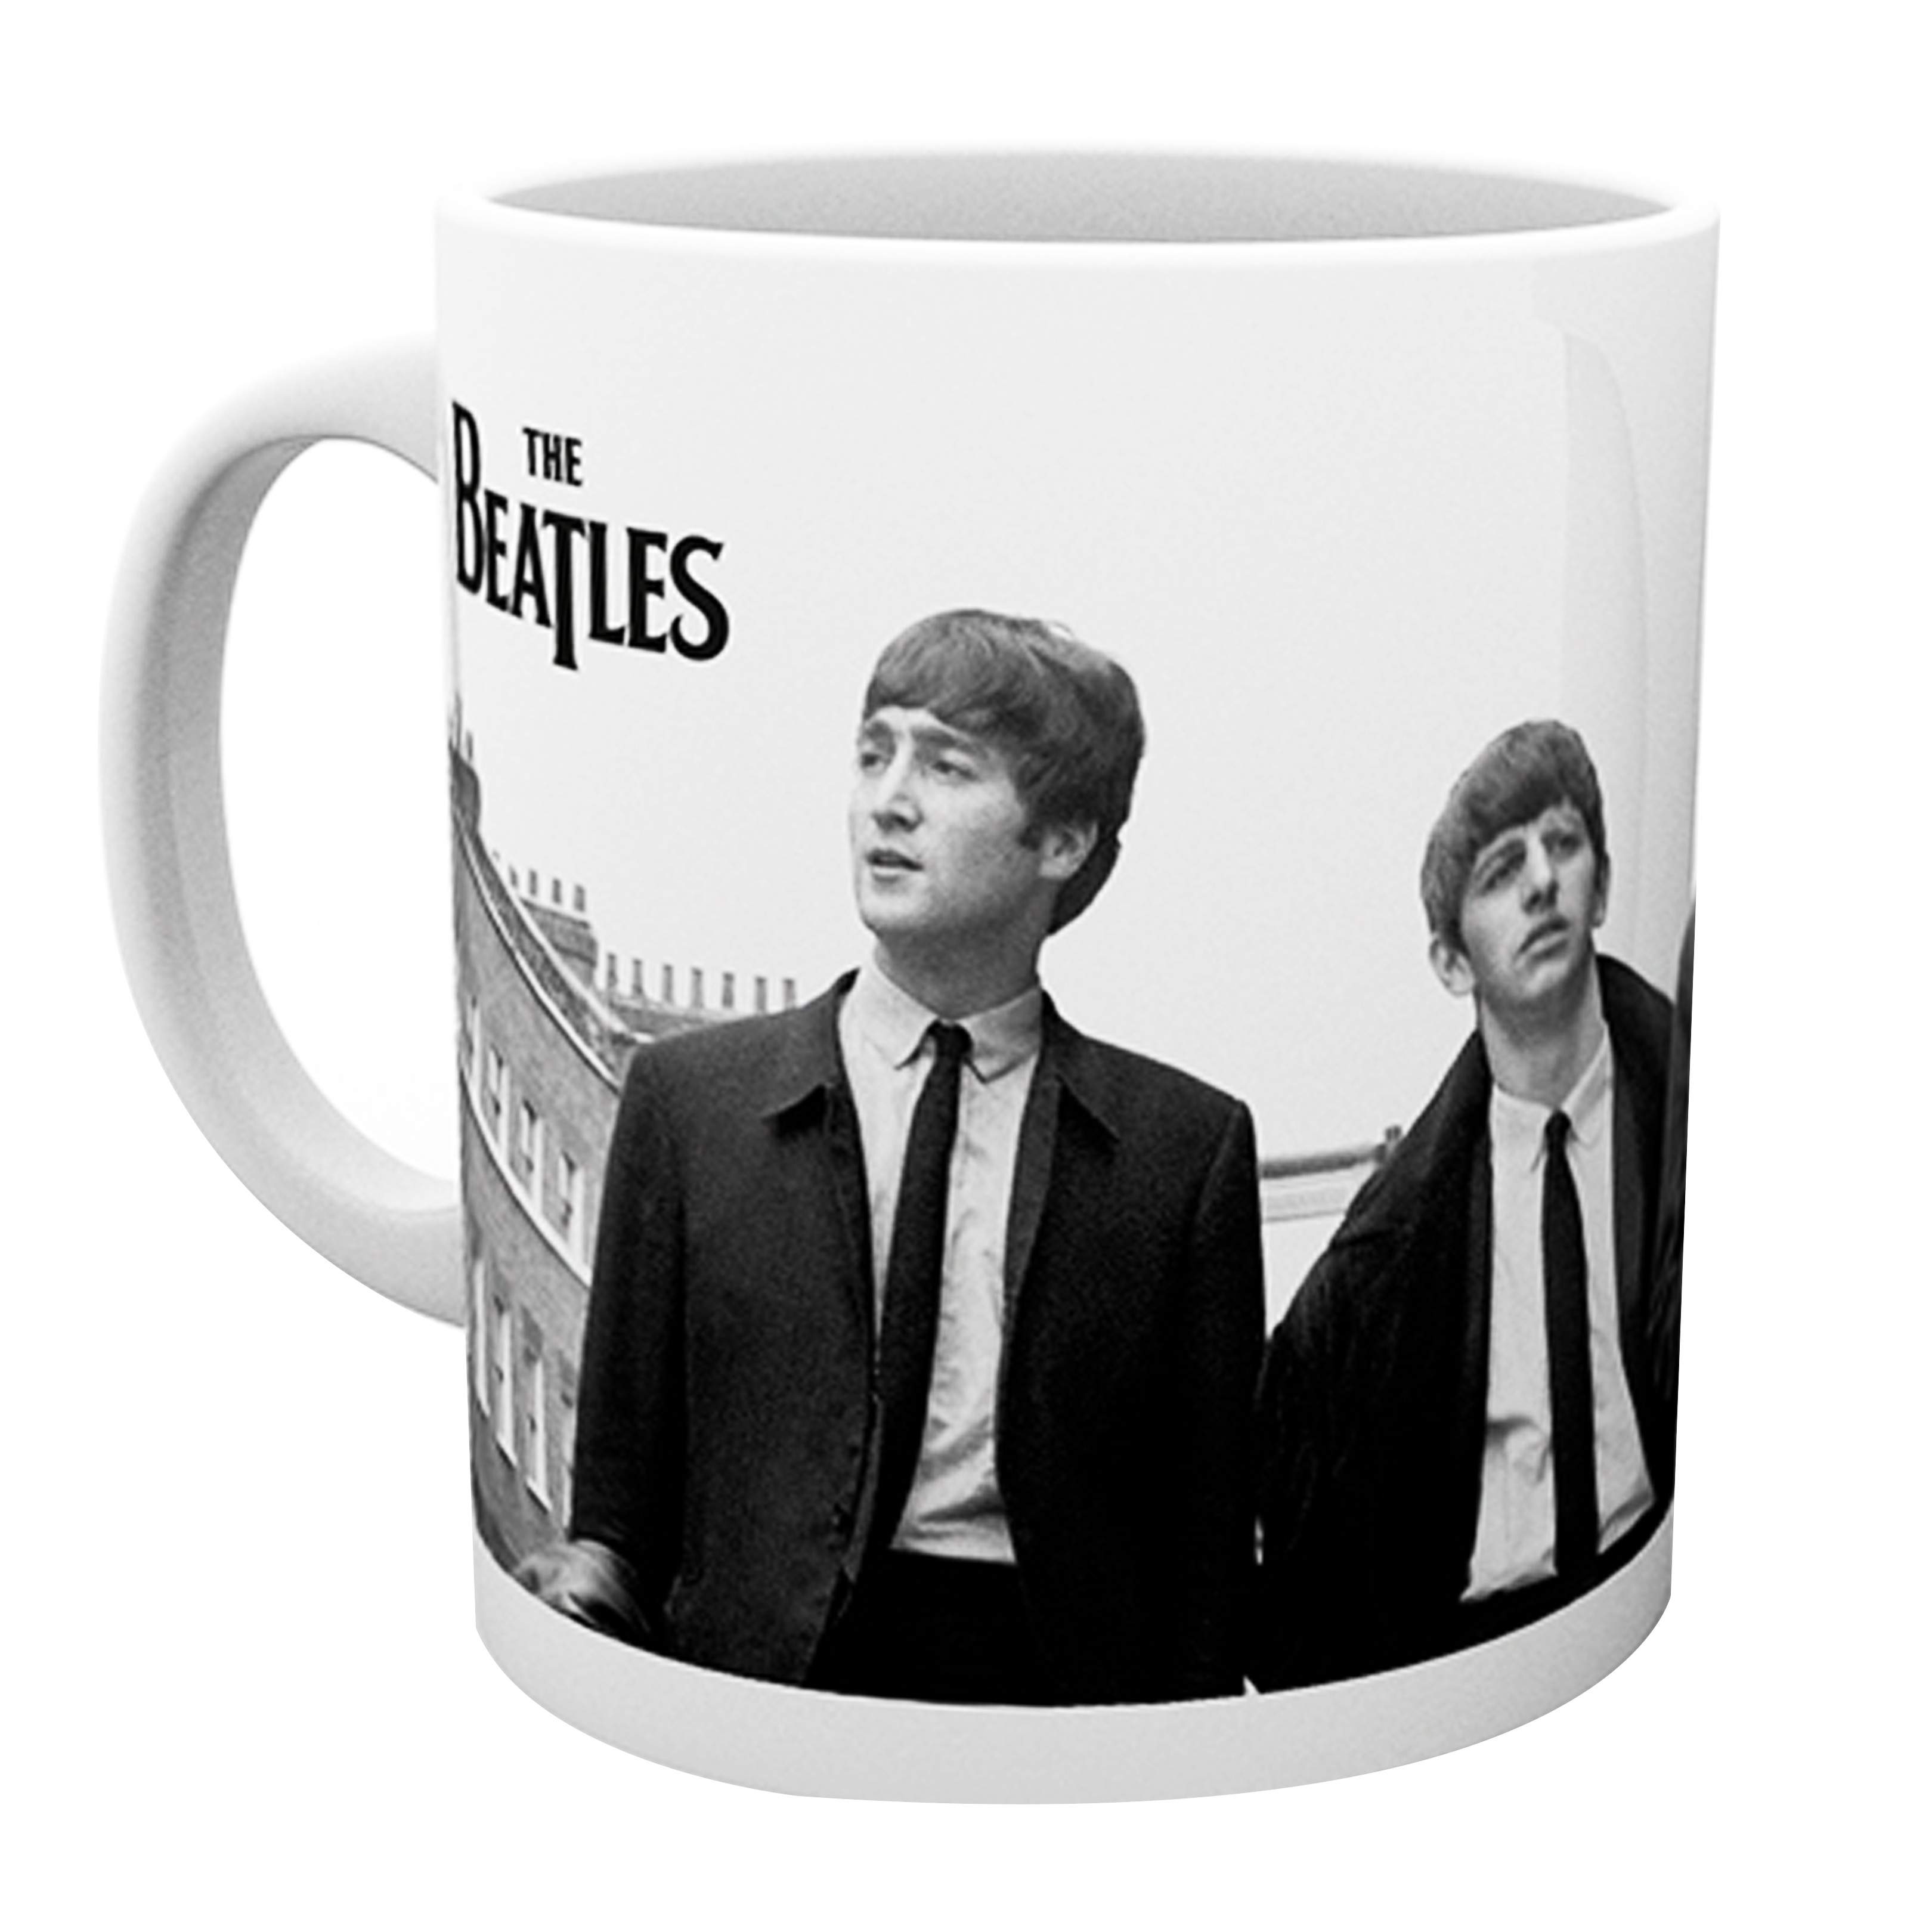 ABYstyle The Beatles In London Mug, 11 oz.